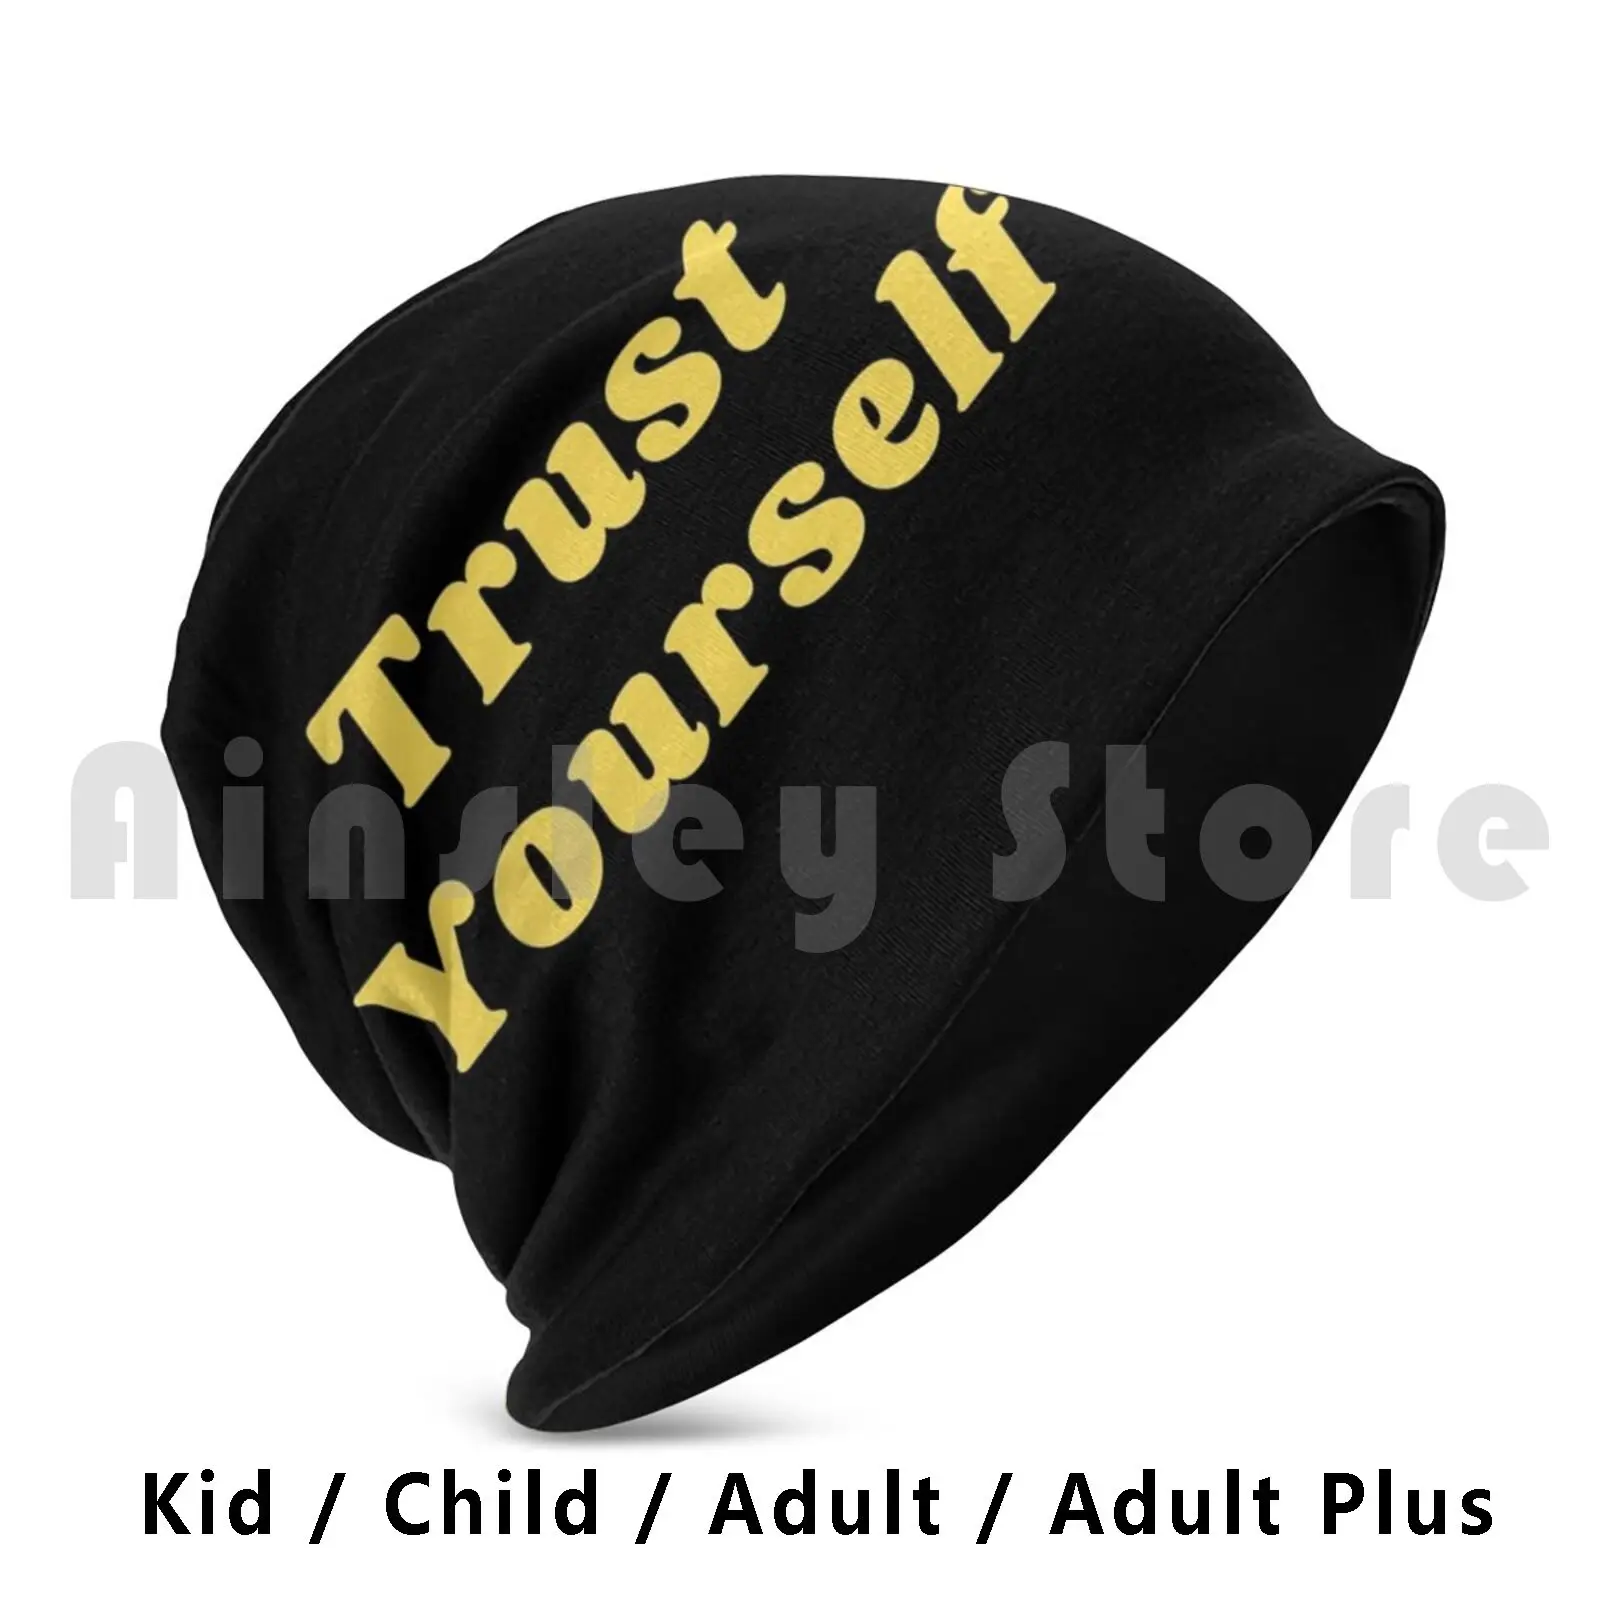 

Trust Yourself Beanies Pullover Cap Comfortable Positivity Happiness Kindness Quote Quotes Love Spiritual Growth